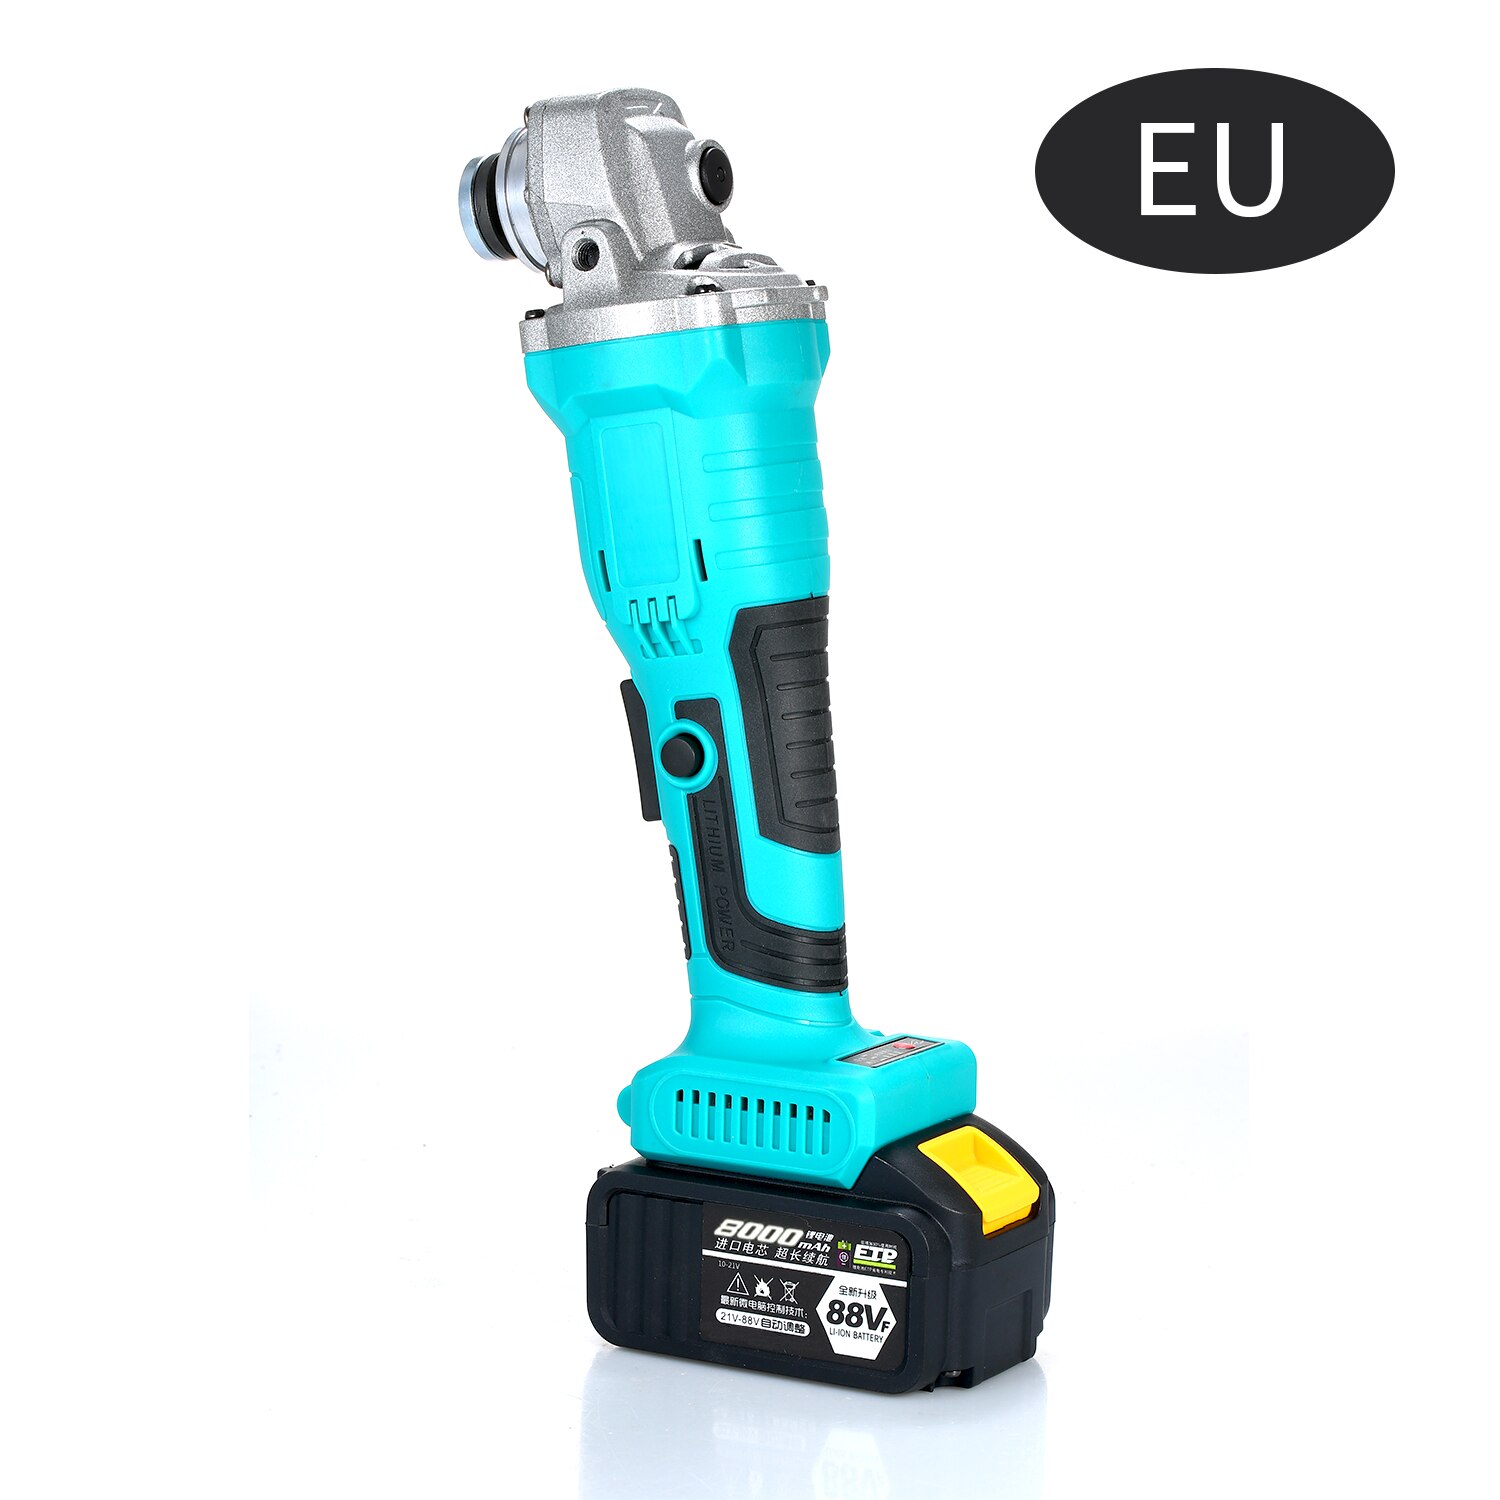 Angle Grinder Lithium Electric Brushless Rechargeable Electric Angle Grinder Household Polishing Machine Angular Grinder: Angle Grinder Set EU